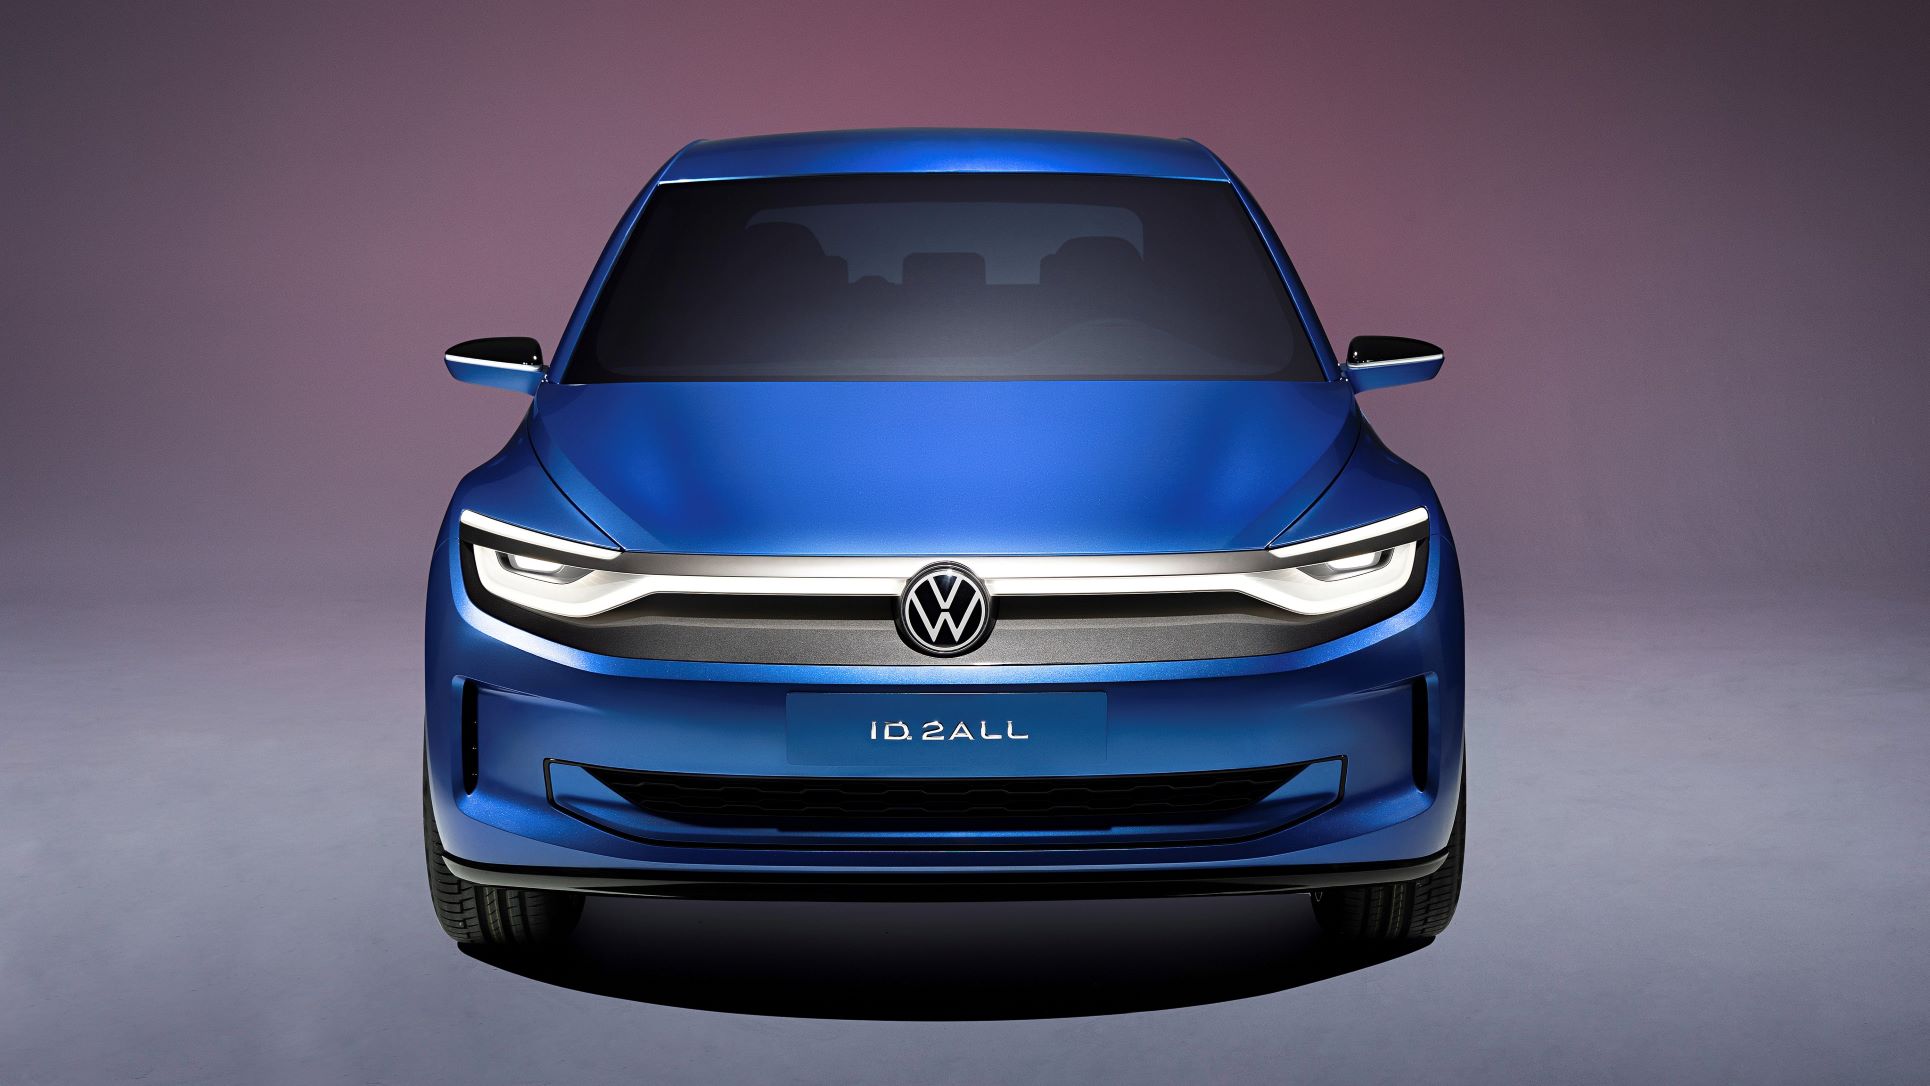 VW previews €25,000 EV with ID. 2all concept - Futurride